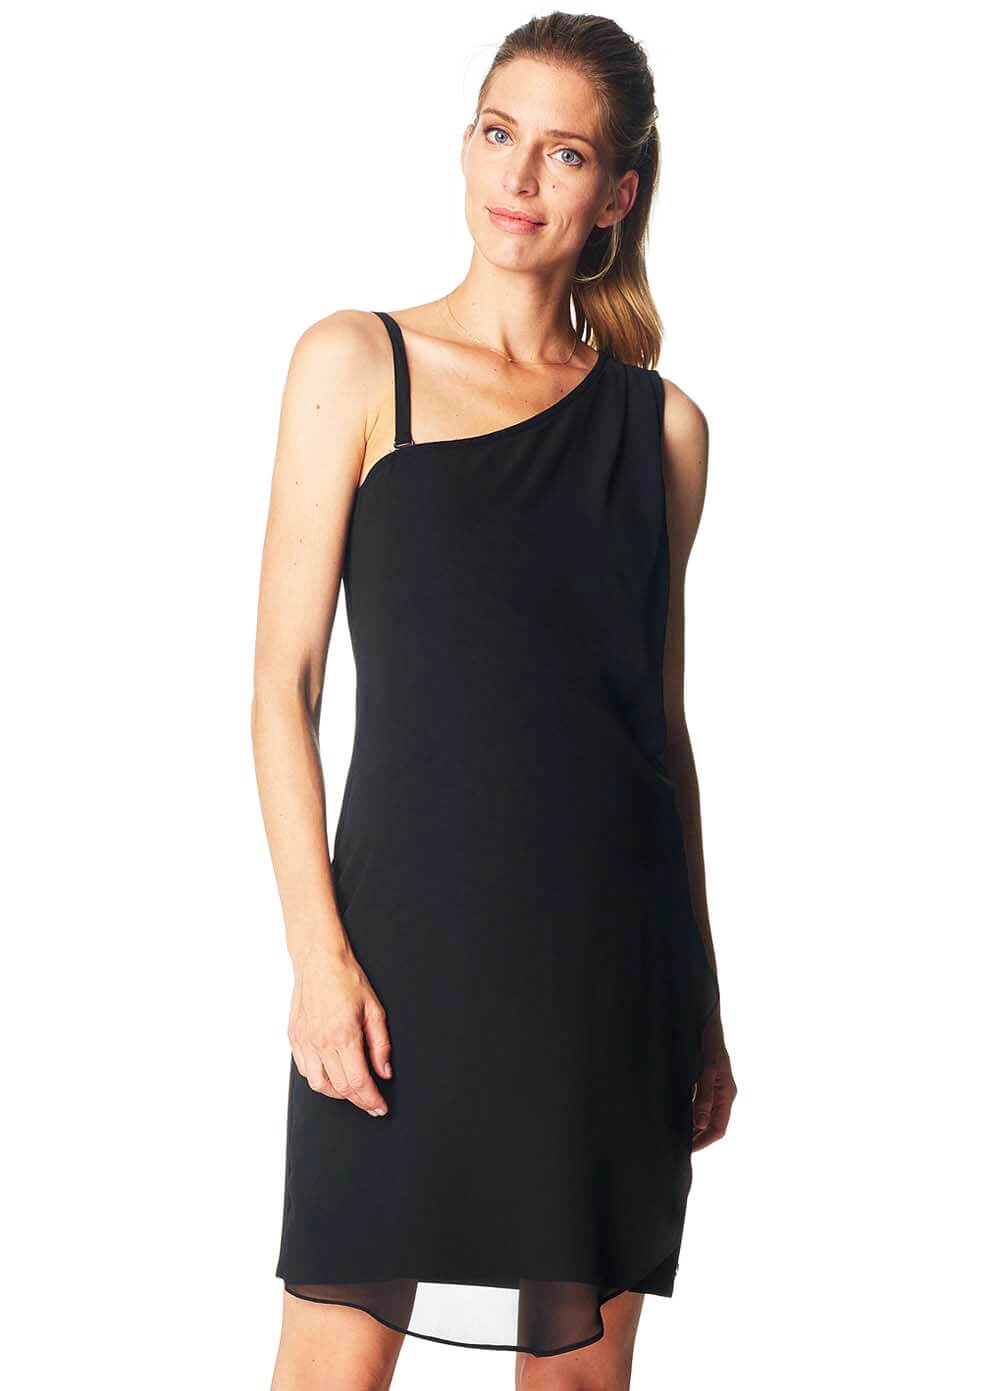 Queen Bee One-Shouldered Maternity Party Dress in Black by Esprit